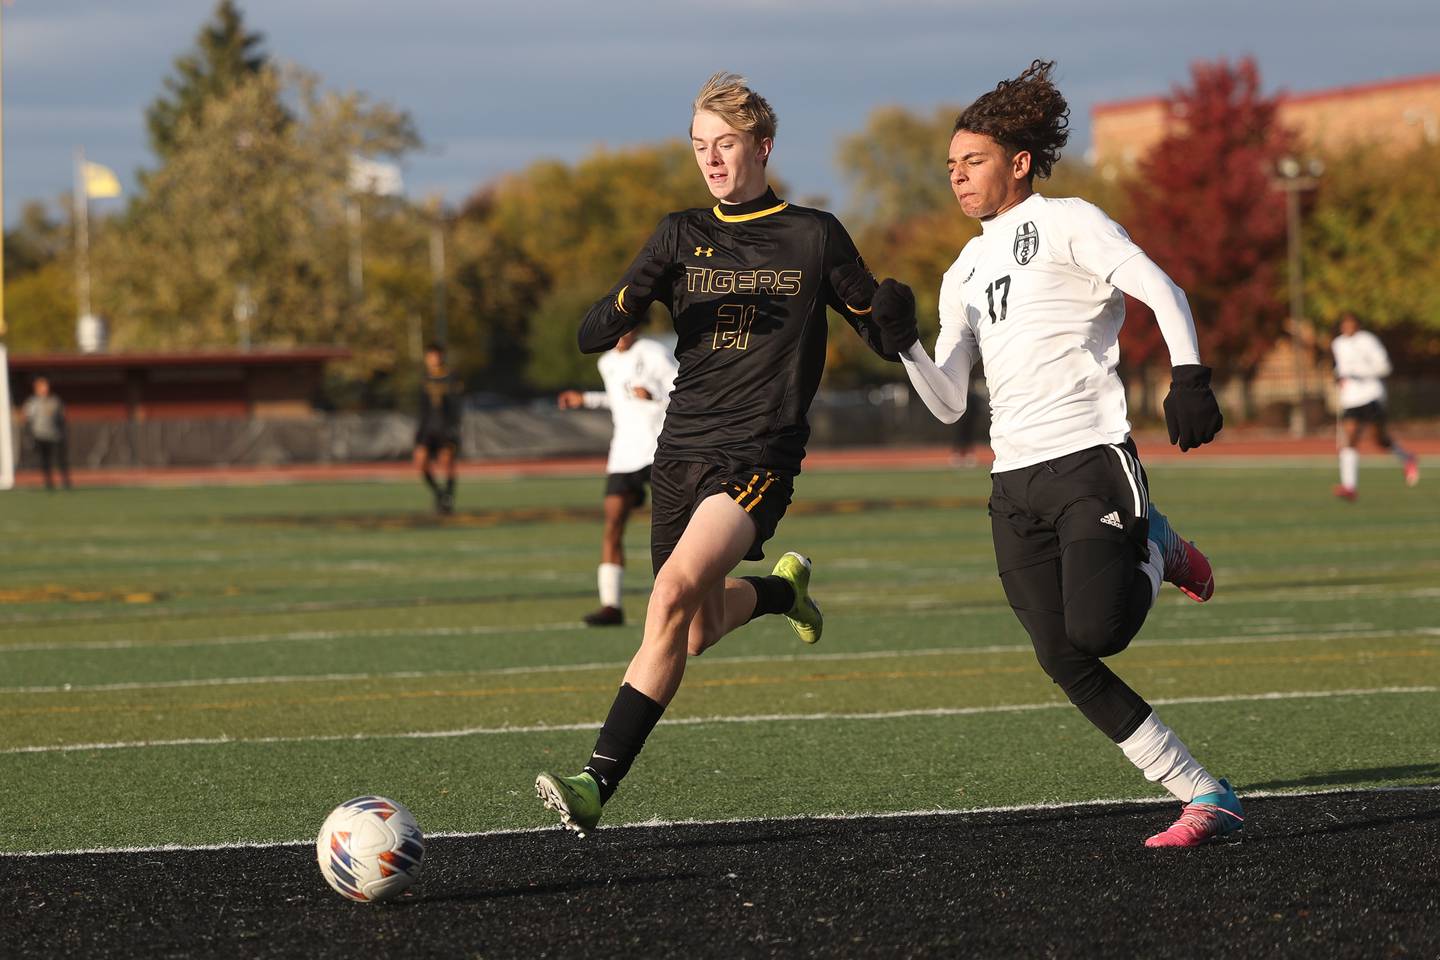 Joliet West’s Landon Brouwer runs down the ball against East Moline United in the Class 3A Joliet West Regional semifinal on Tuesday.